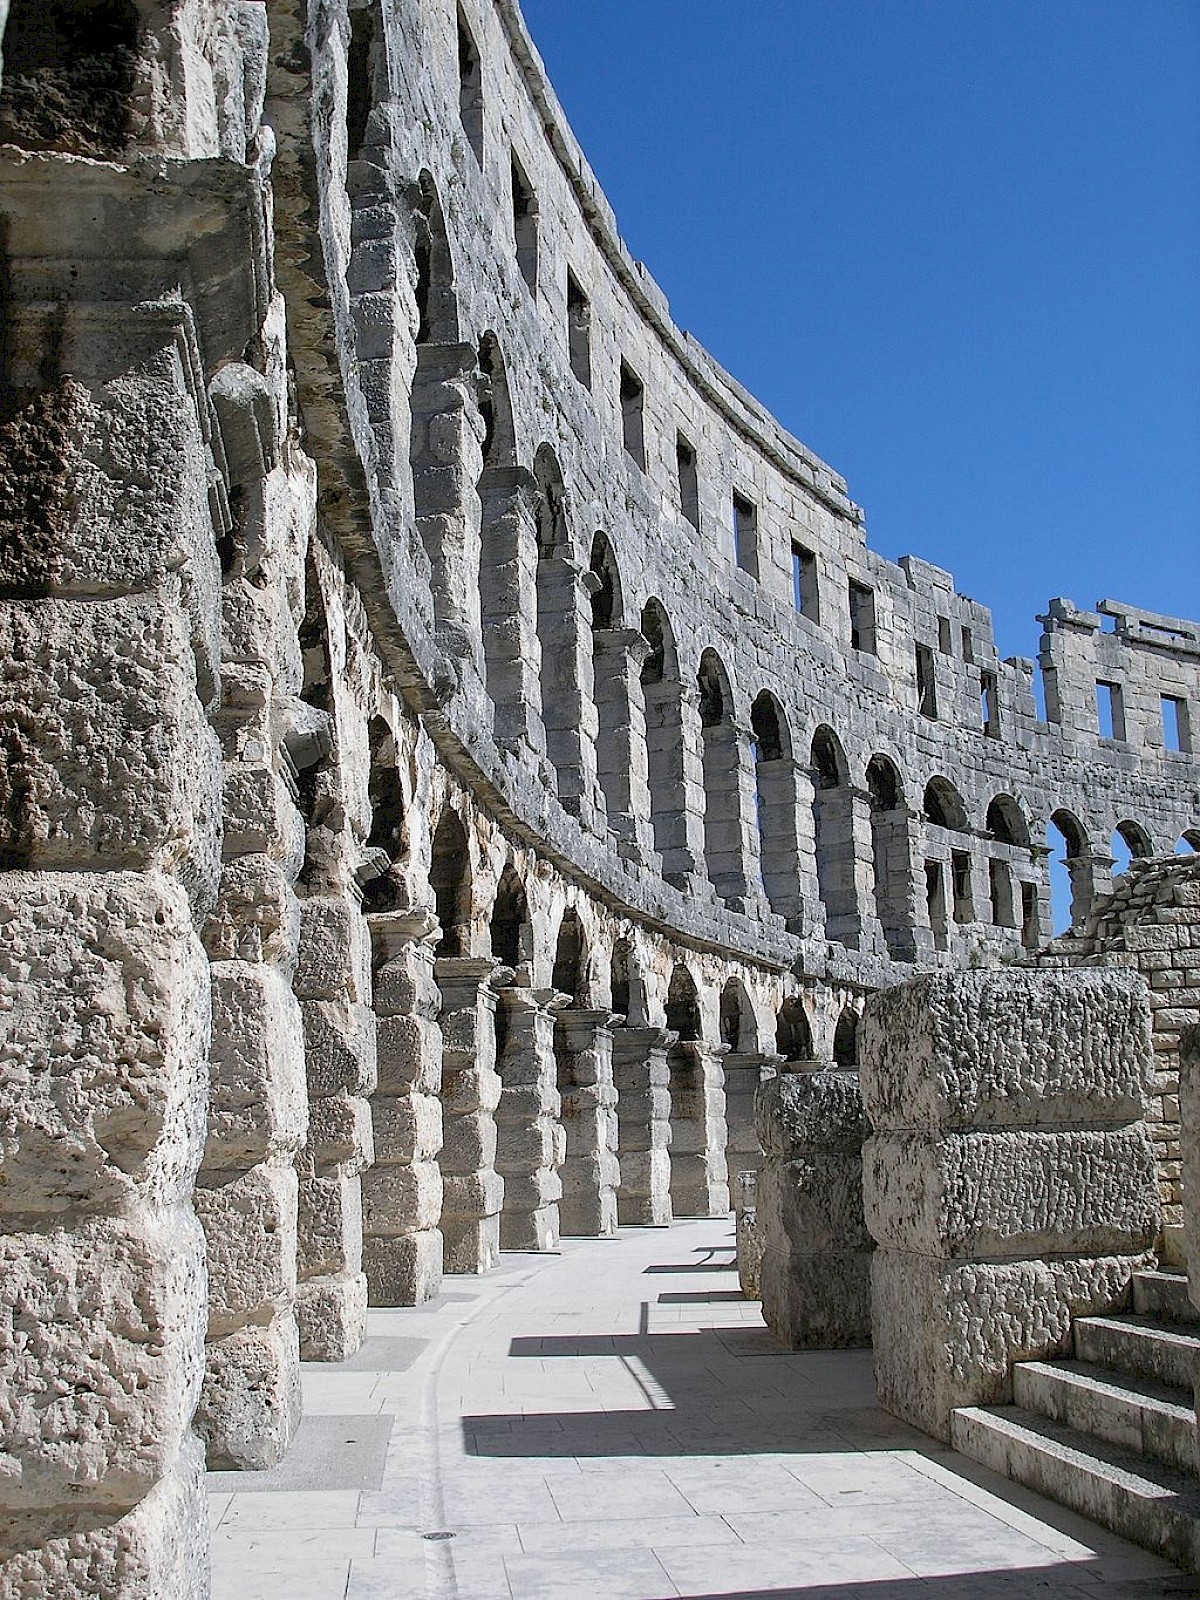 Pula Arena, additional view